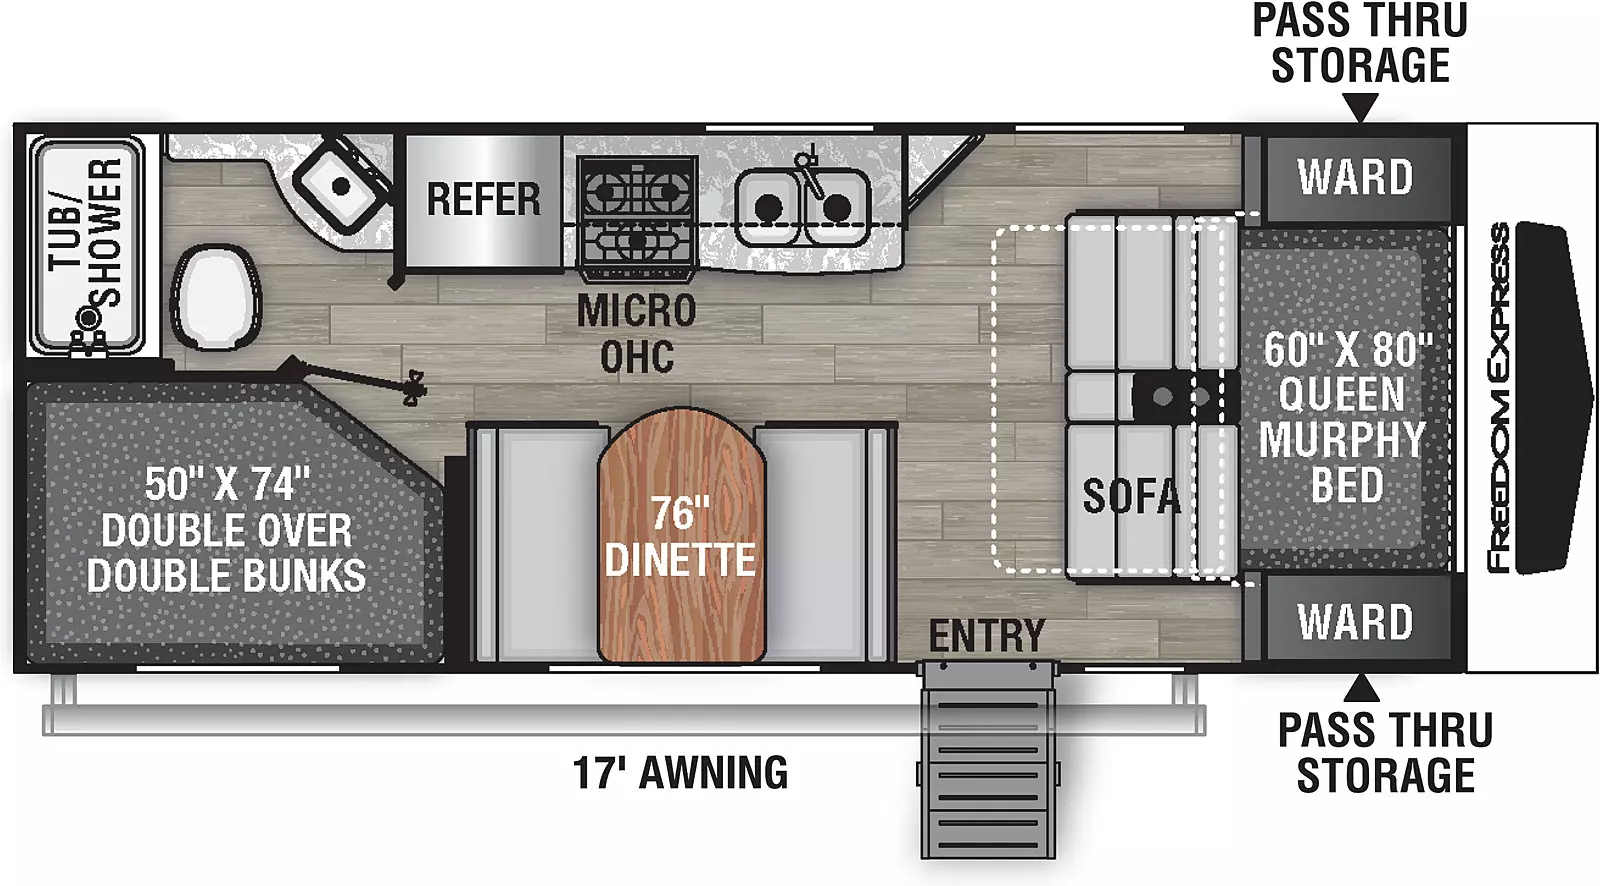 The 22SE has no slide outs and one entry door located on the door side. Interior layout from front to back: front queen murphy bed sofa with wardrobes on each side; off-door side kitchen with refrigerator, microwave cabinet, cooktop and double basin sink; door side dinette; rear off-door side bathroom; rear door side double over double bunks.